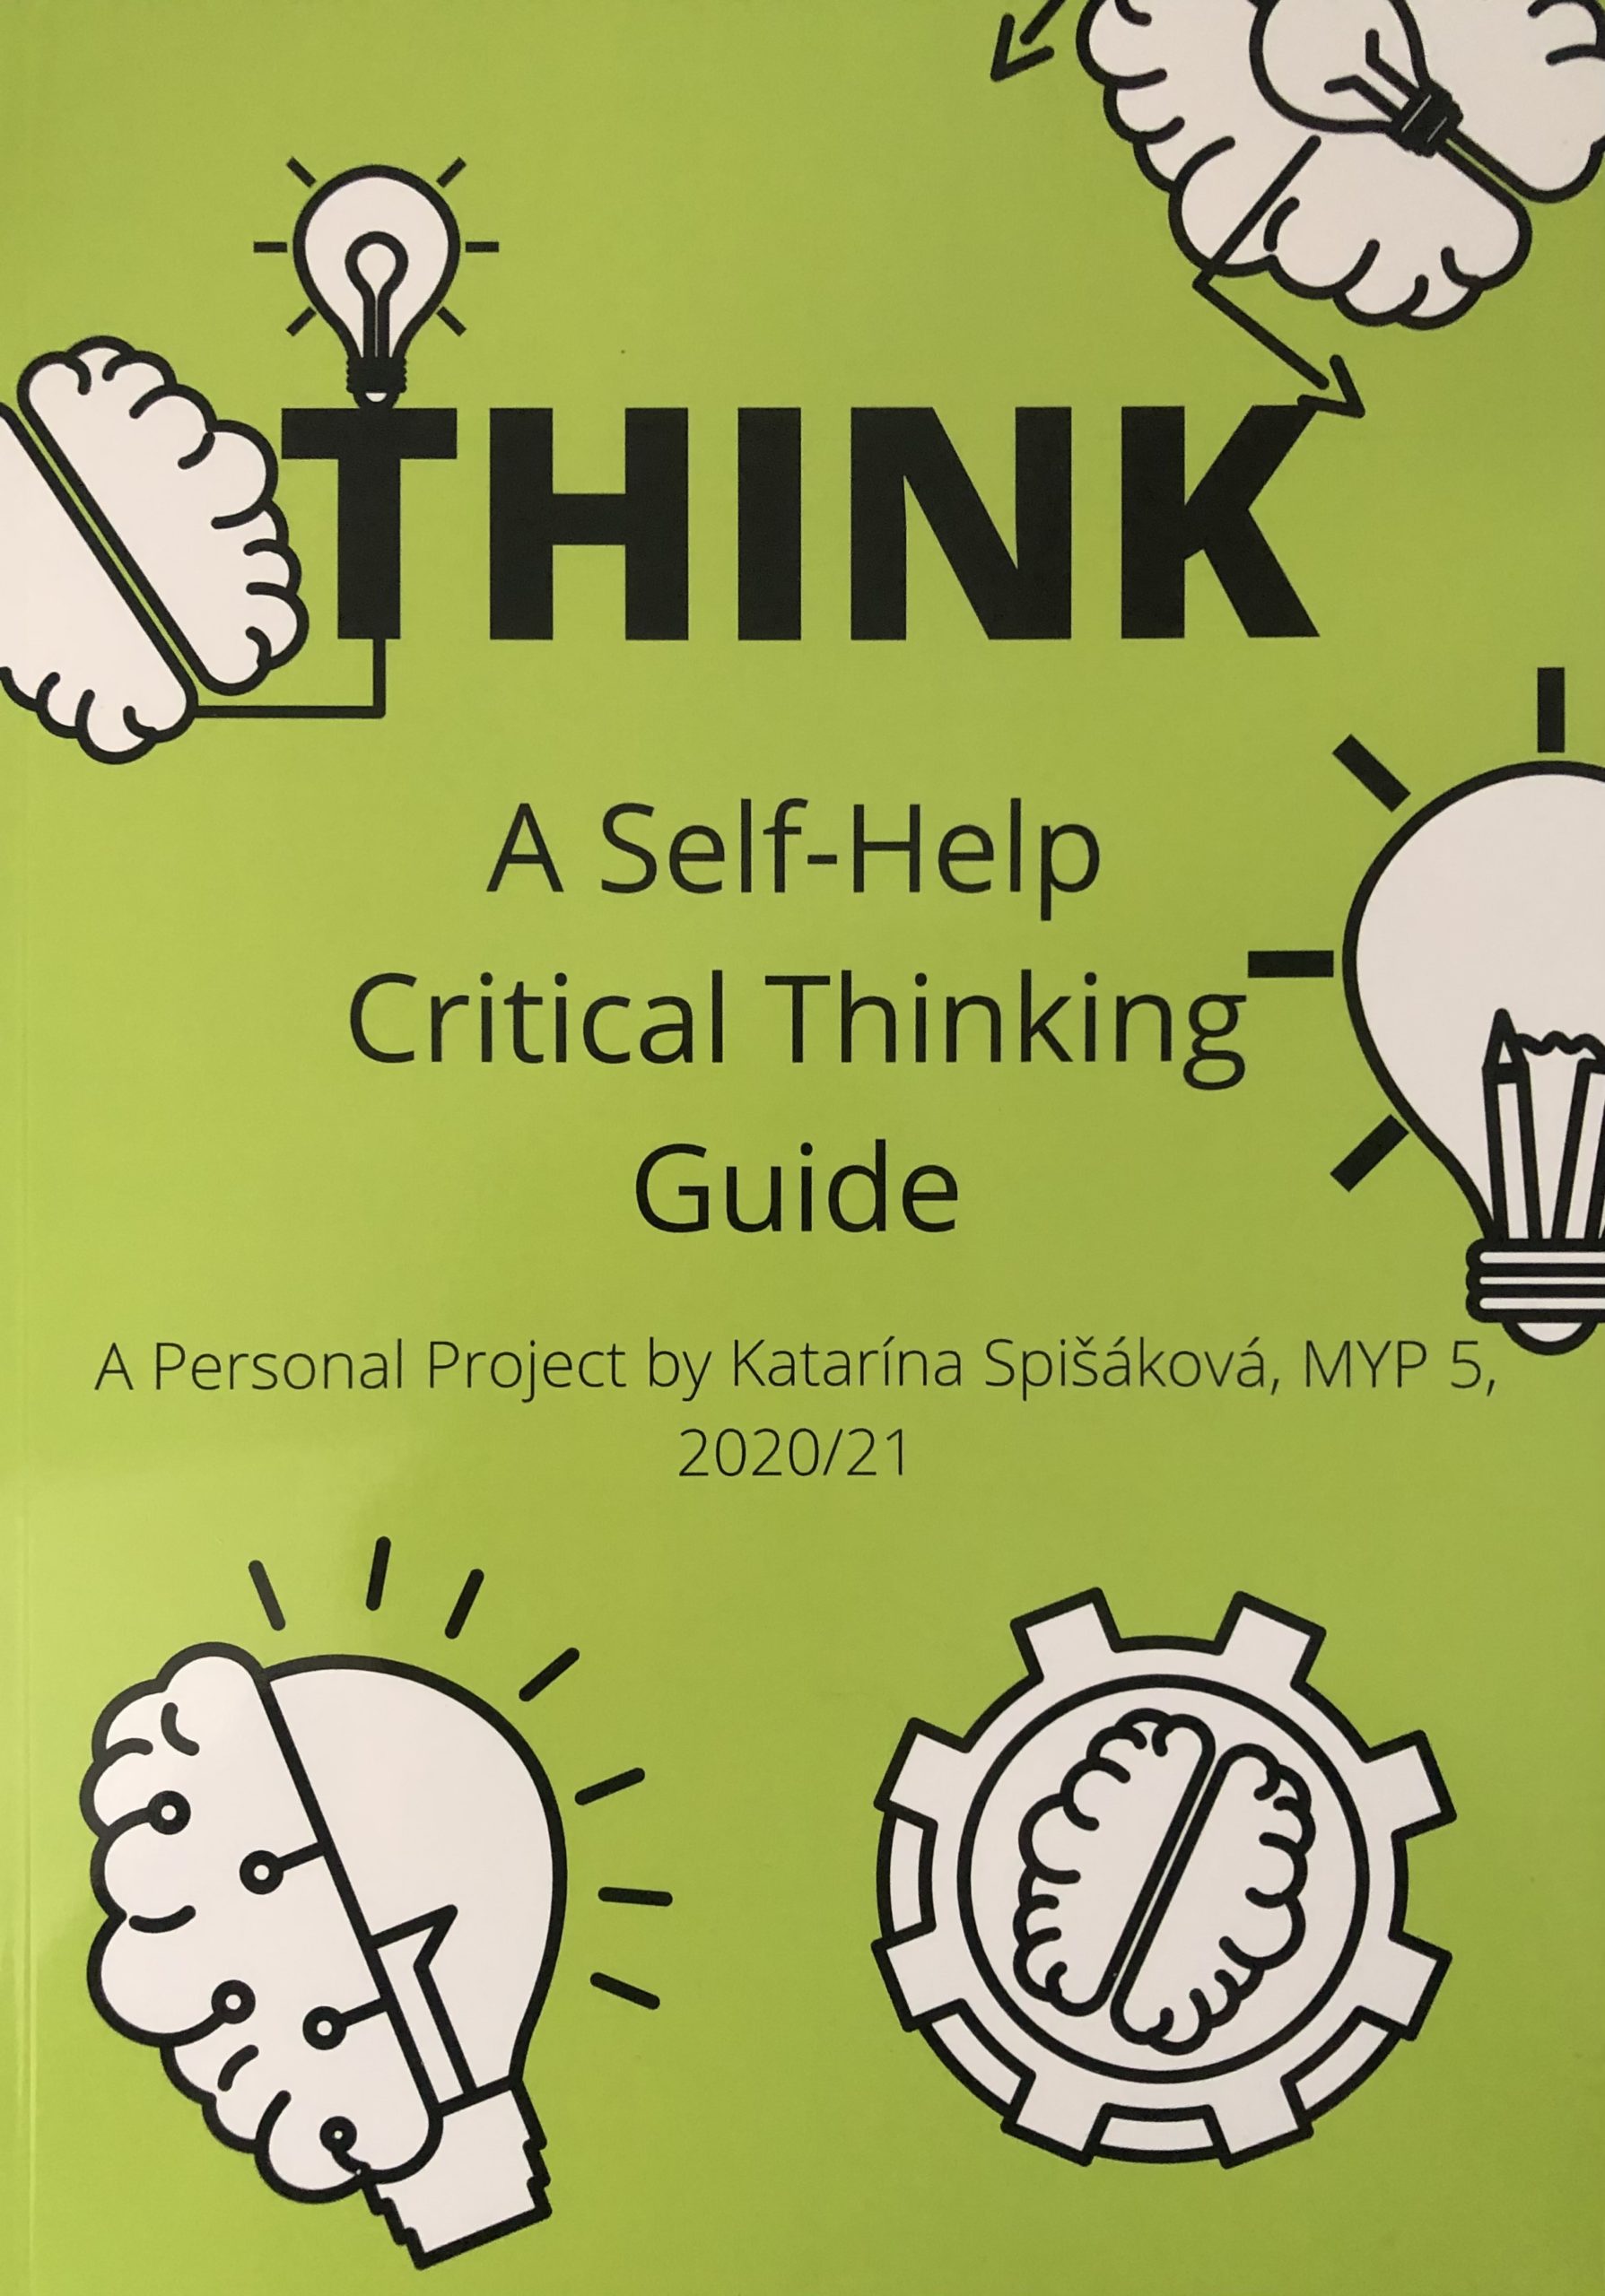 THINK (A Self-Help Critical Thinking Guide)